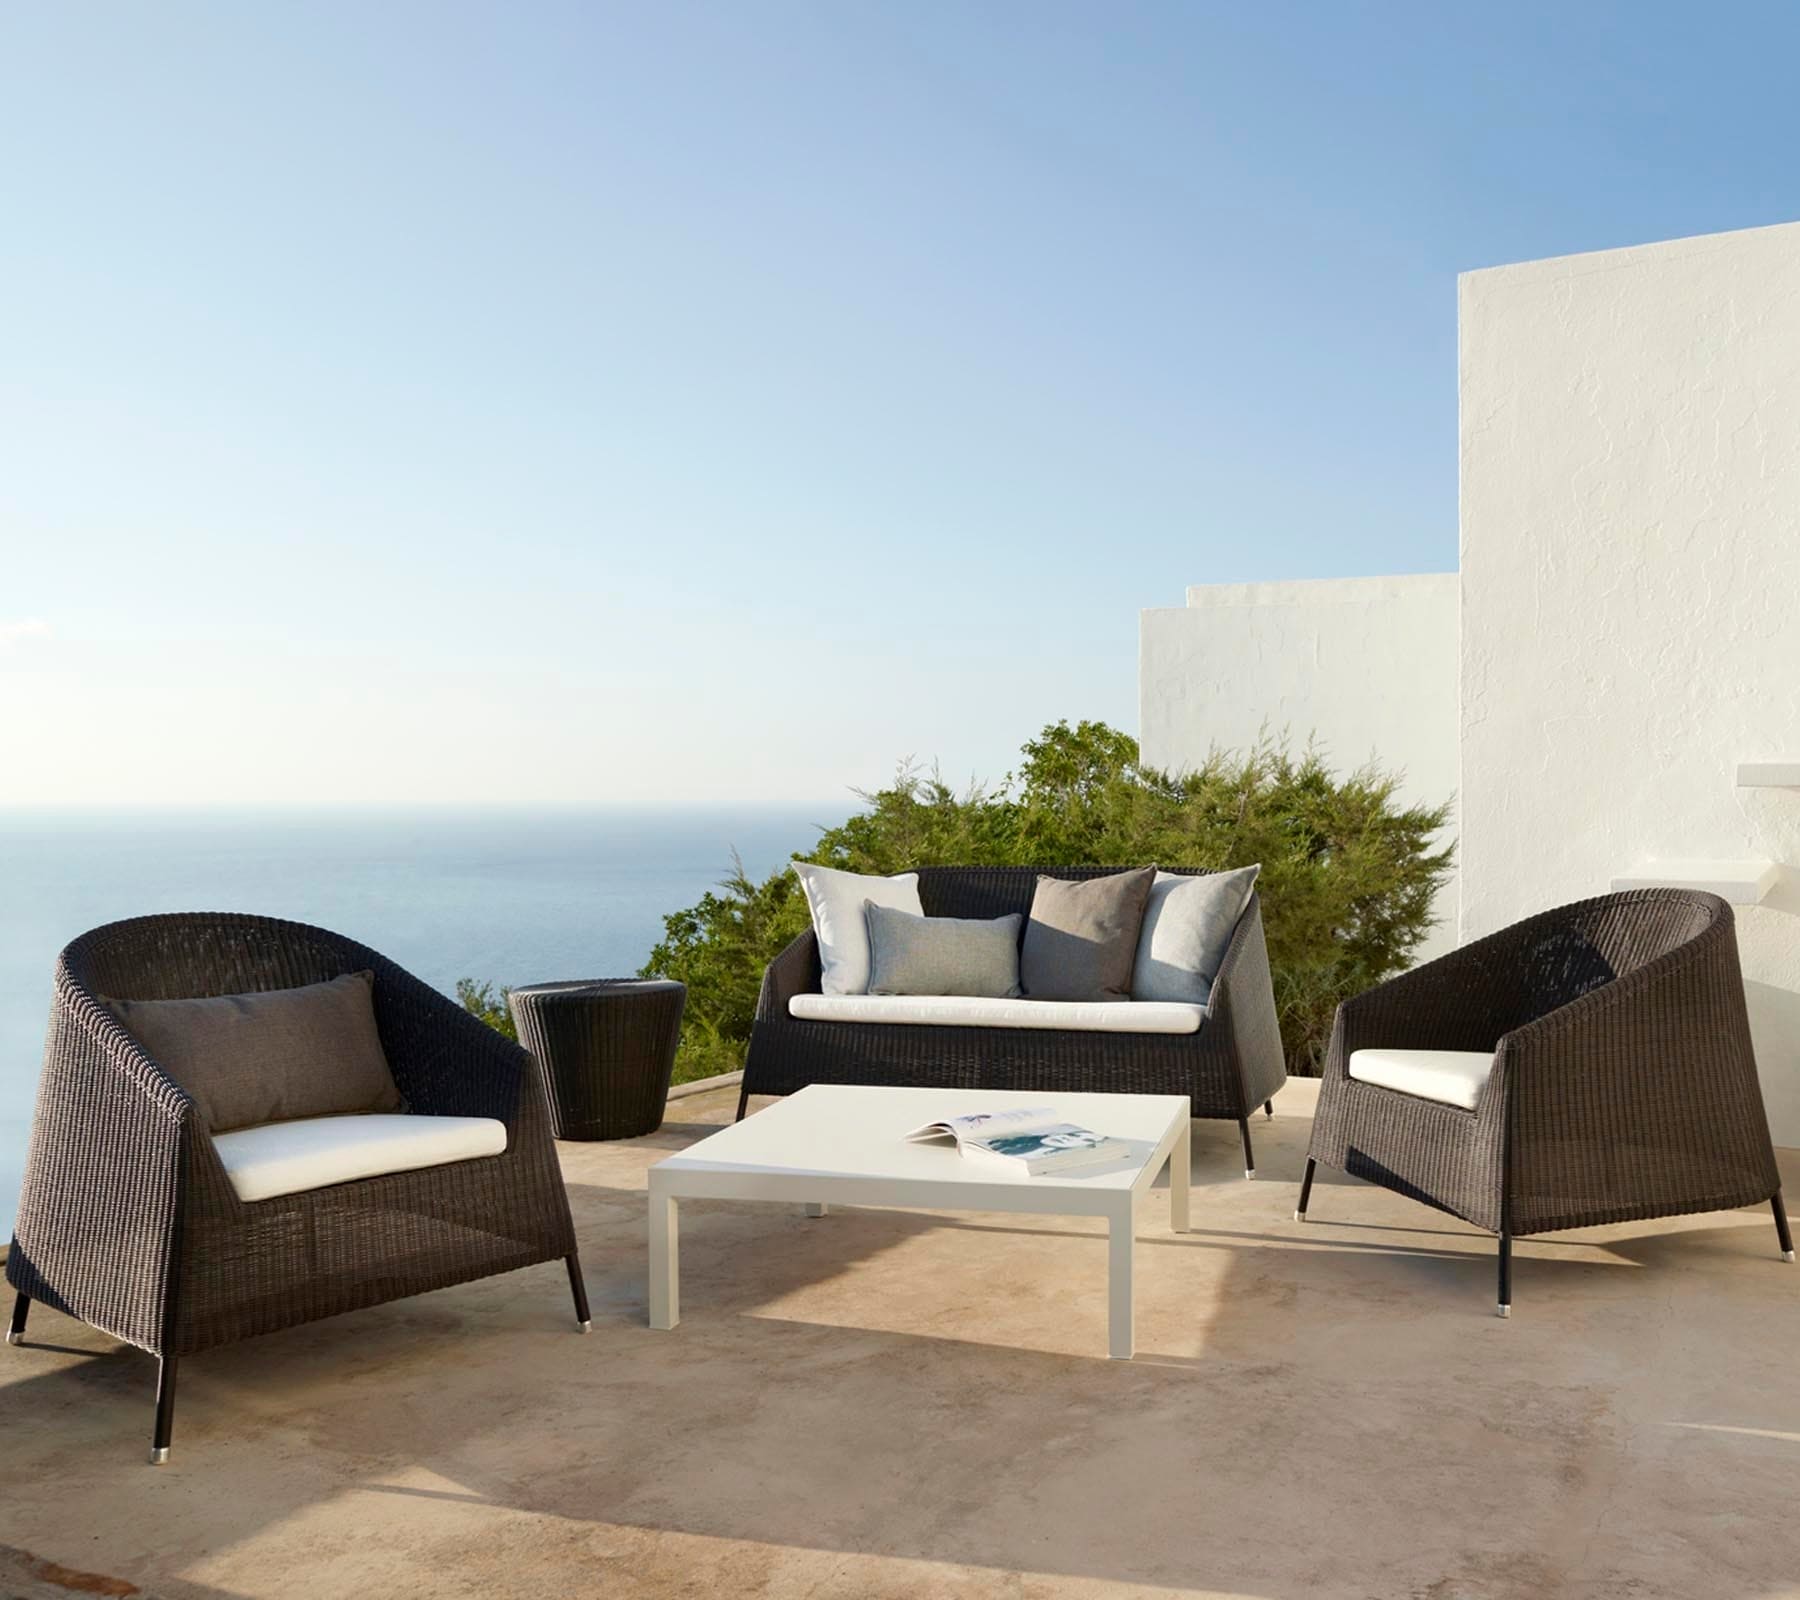 Boxhill's Kingston Stackable Outdoor 2-Seater Sofa lifestyle image with Kingston Outdoor Stackable Lounge Chair, Kingston Outdoor Footstool | Side Table and white square table at patio